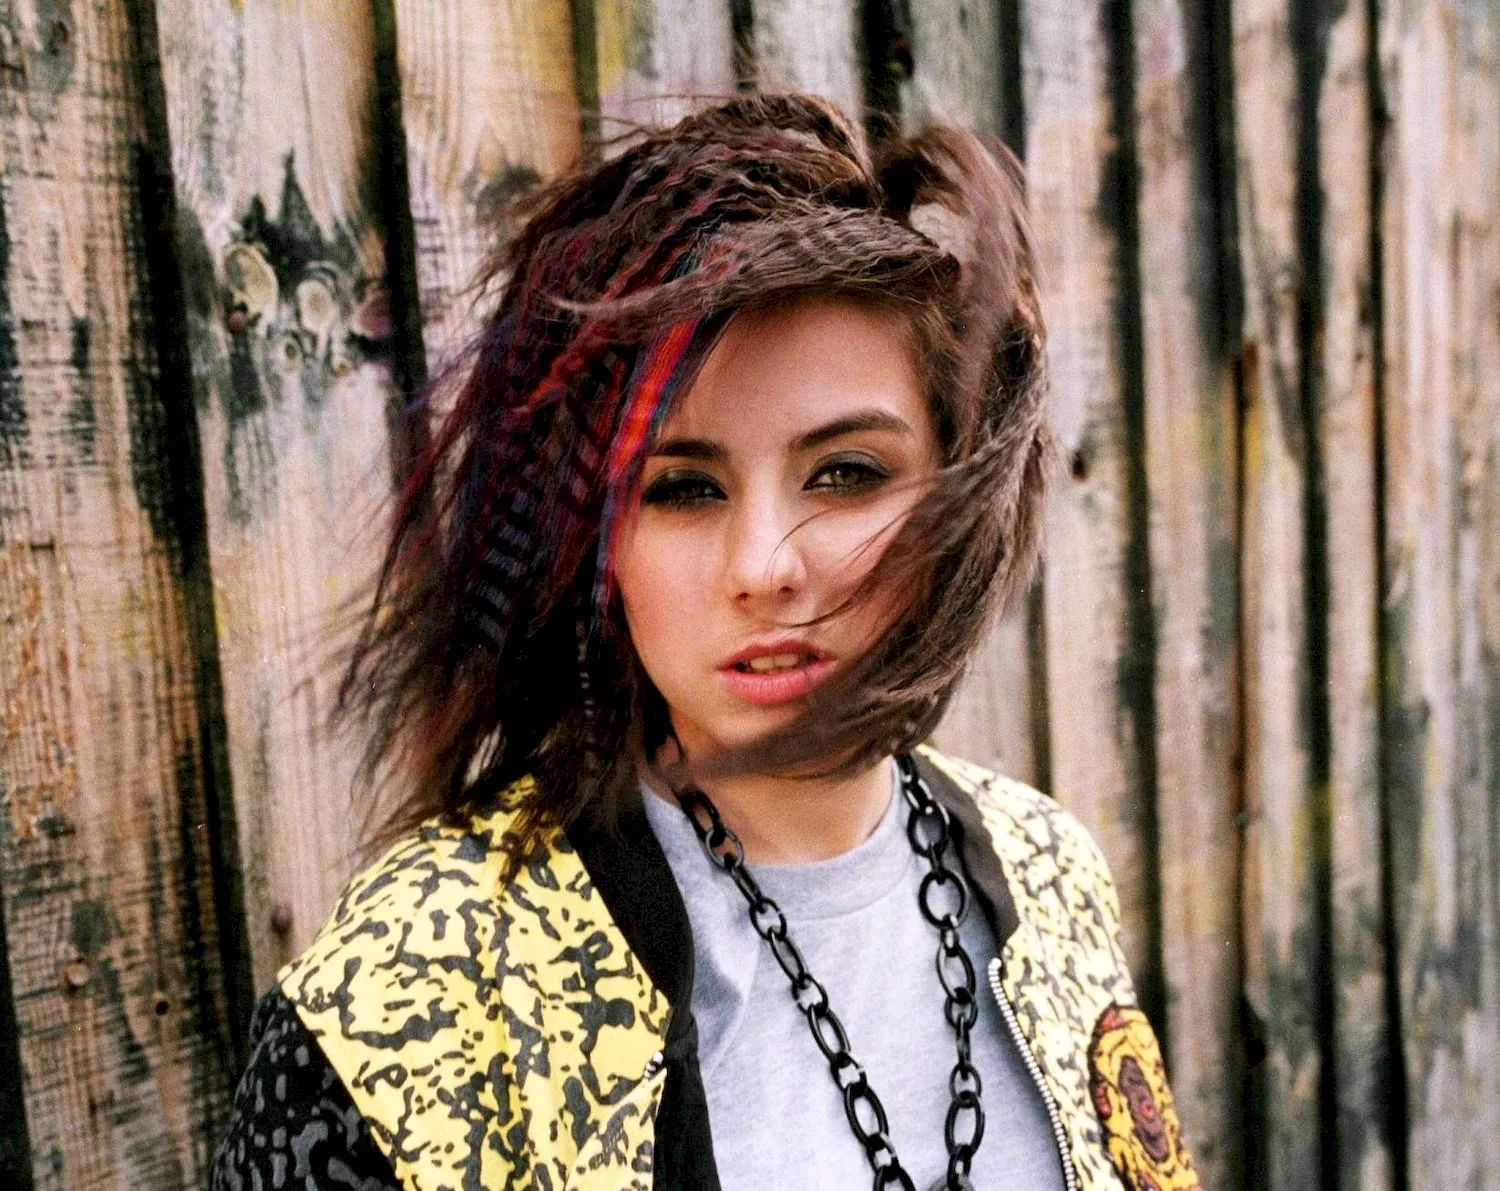 Lady Sovereign 2020